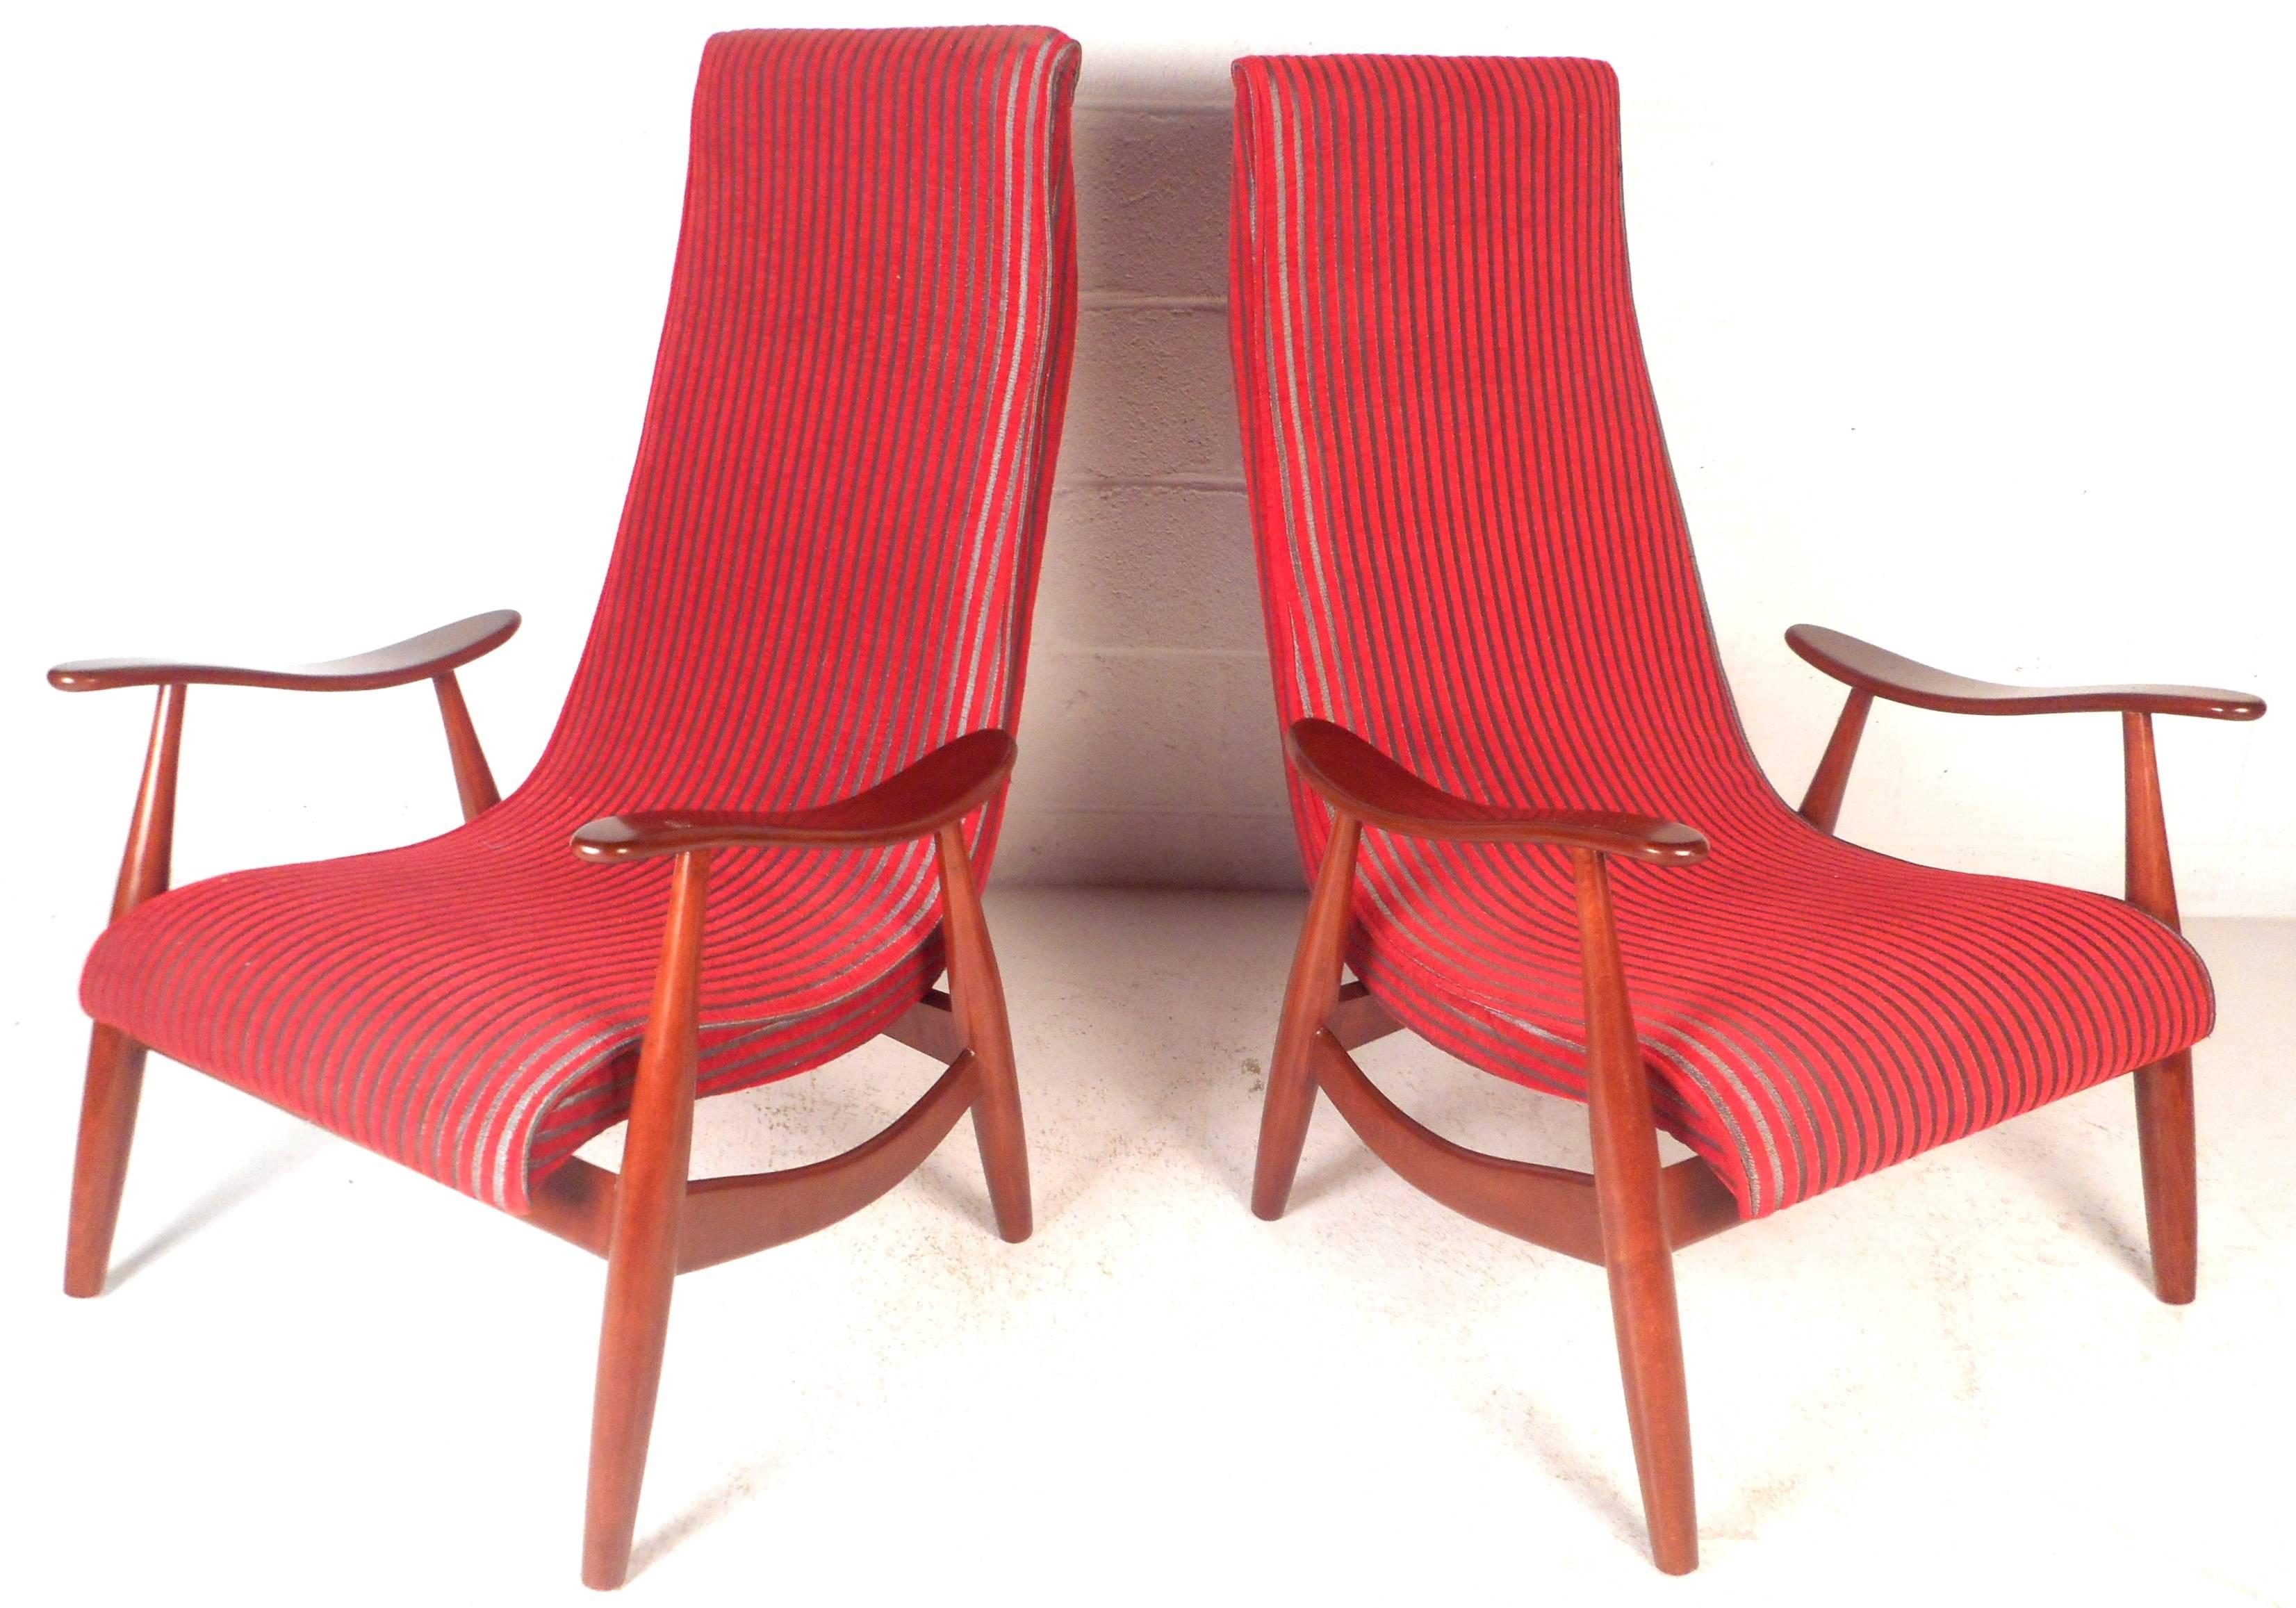 This beautiful pair of vintage modern lounge chairs feature a solid walnut frame with sculpted arm rests. Sleek design with unique angled legs, stylish curved stretchers, and a high backrest. Comfortable seating wonderfully upholstered in plush red